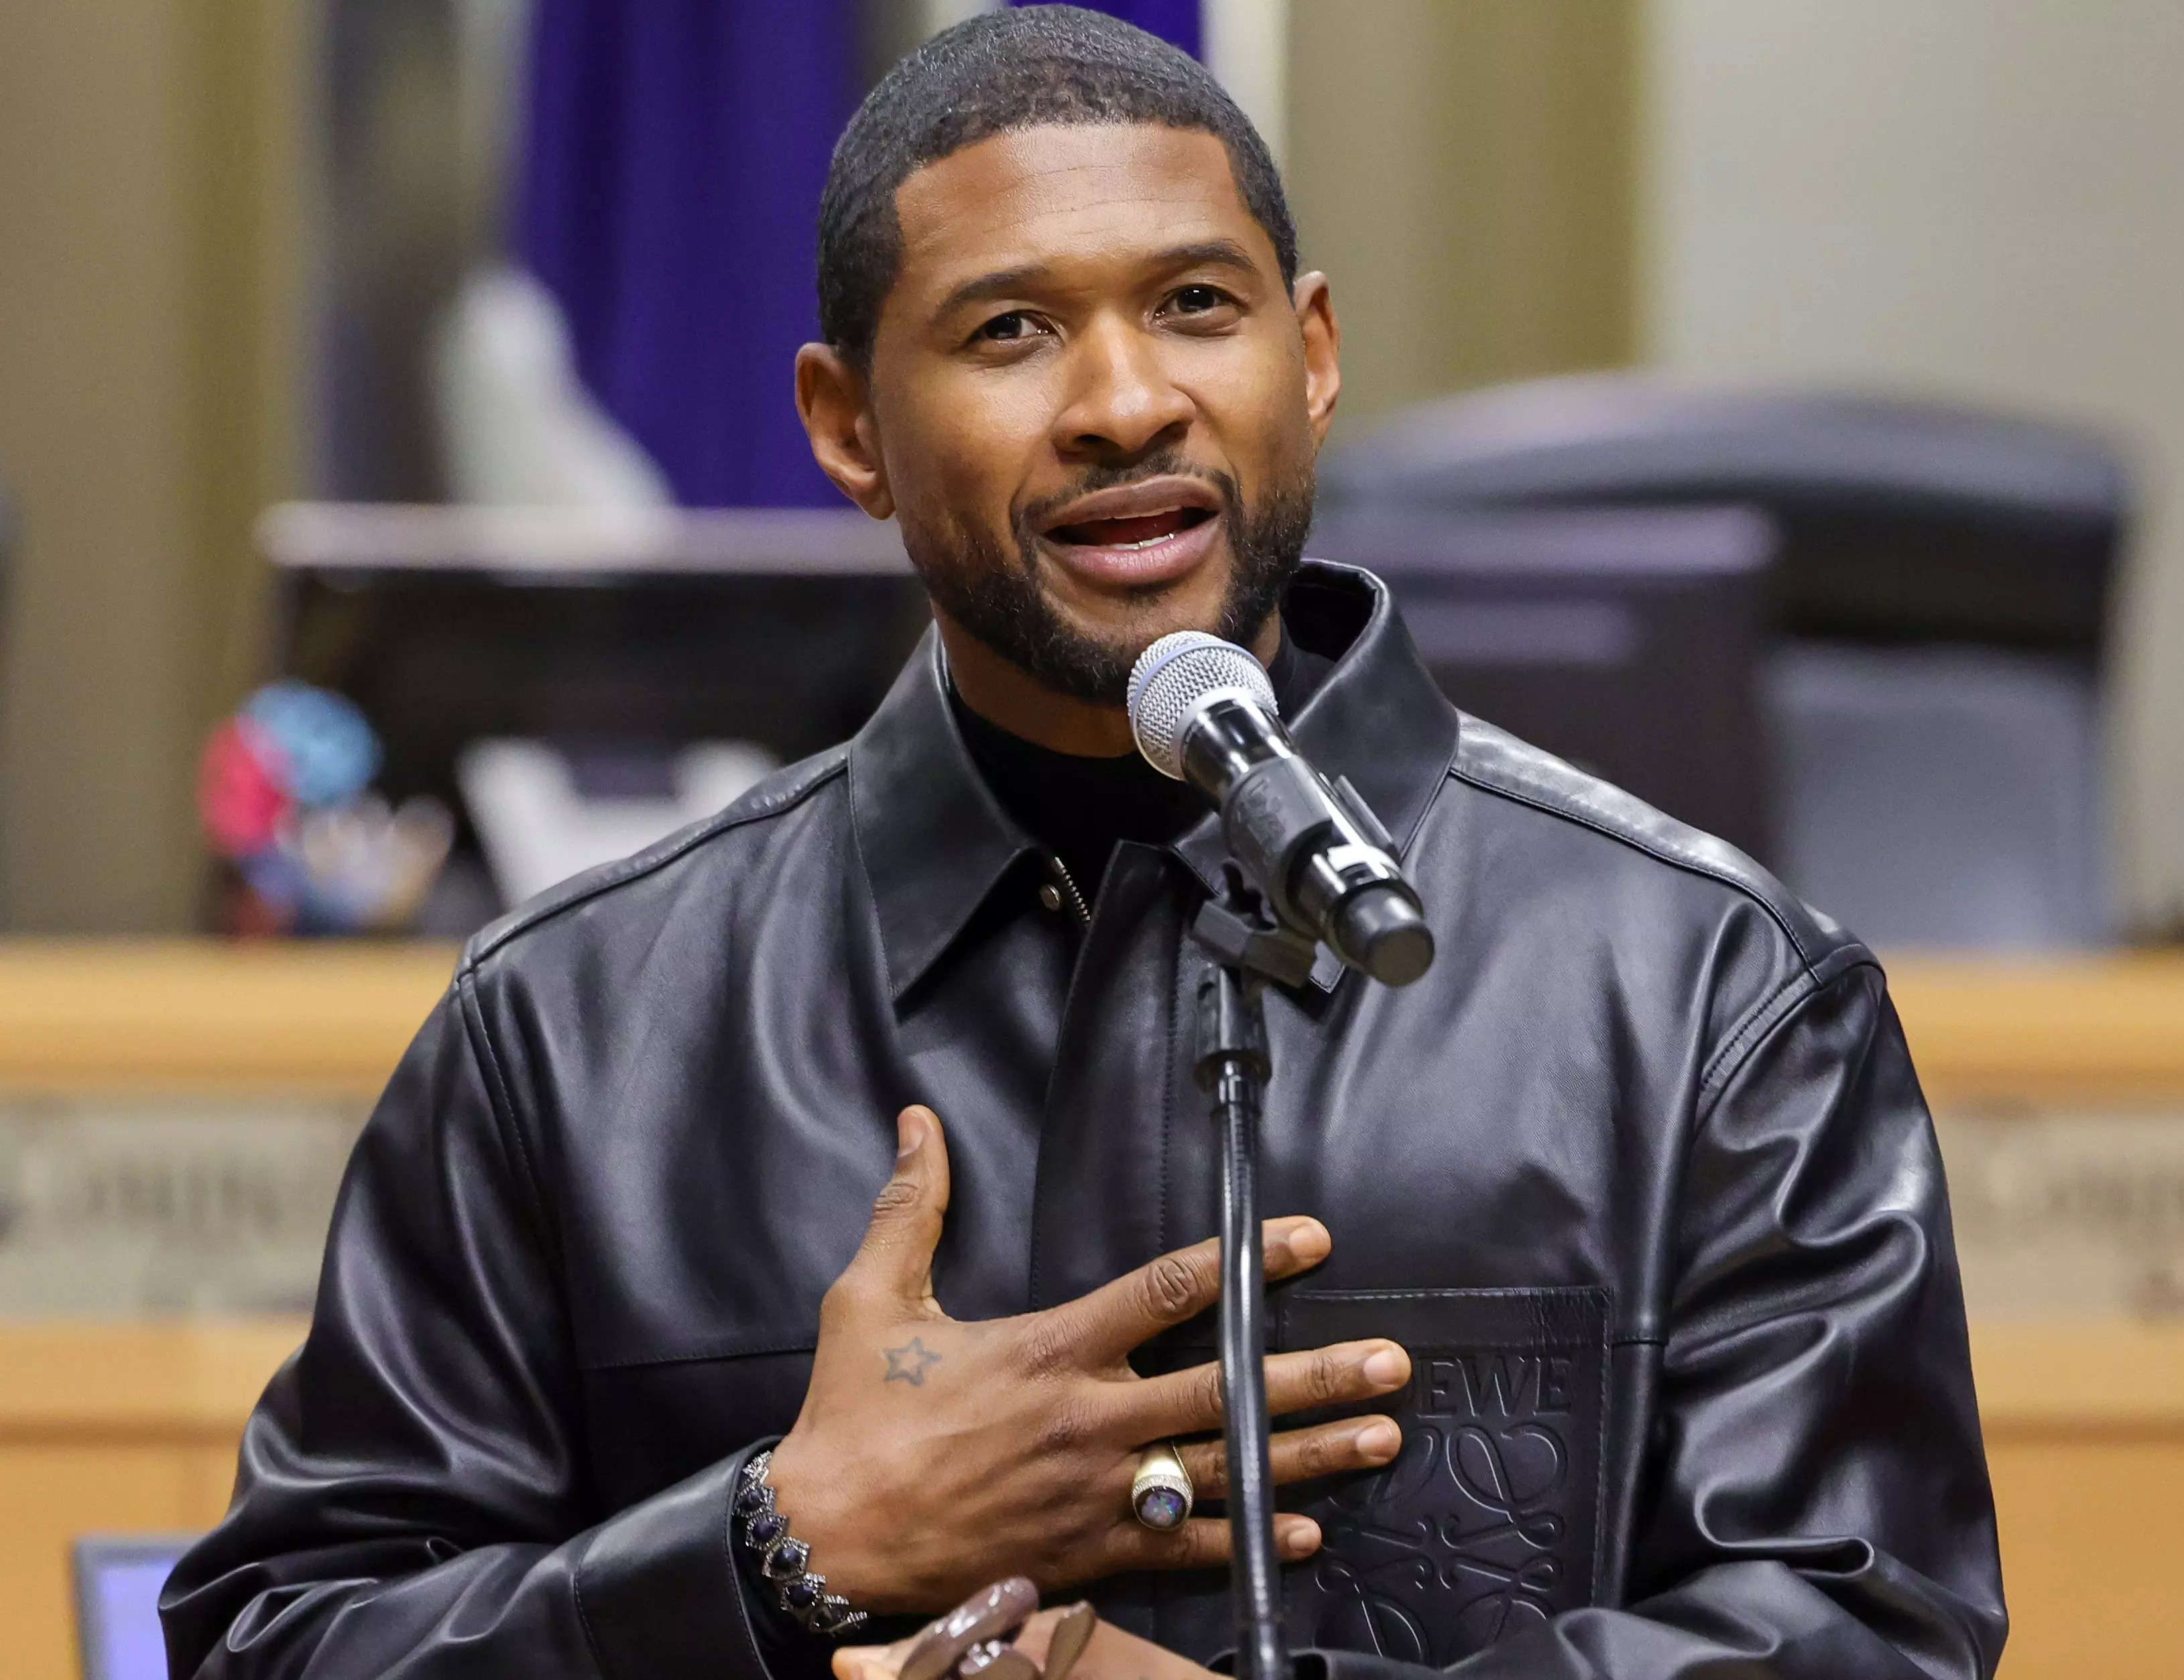 How Vogue got Usher's debut cover wrong Business Insider India